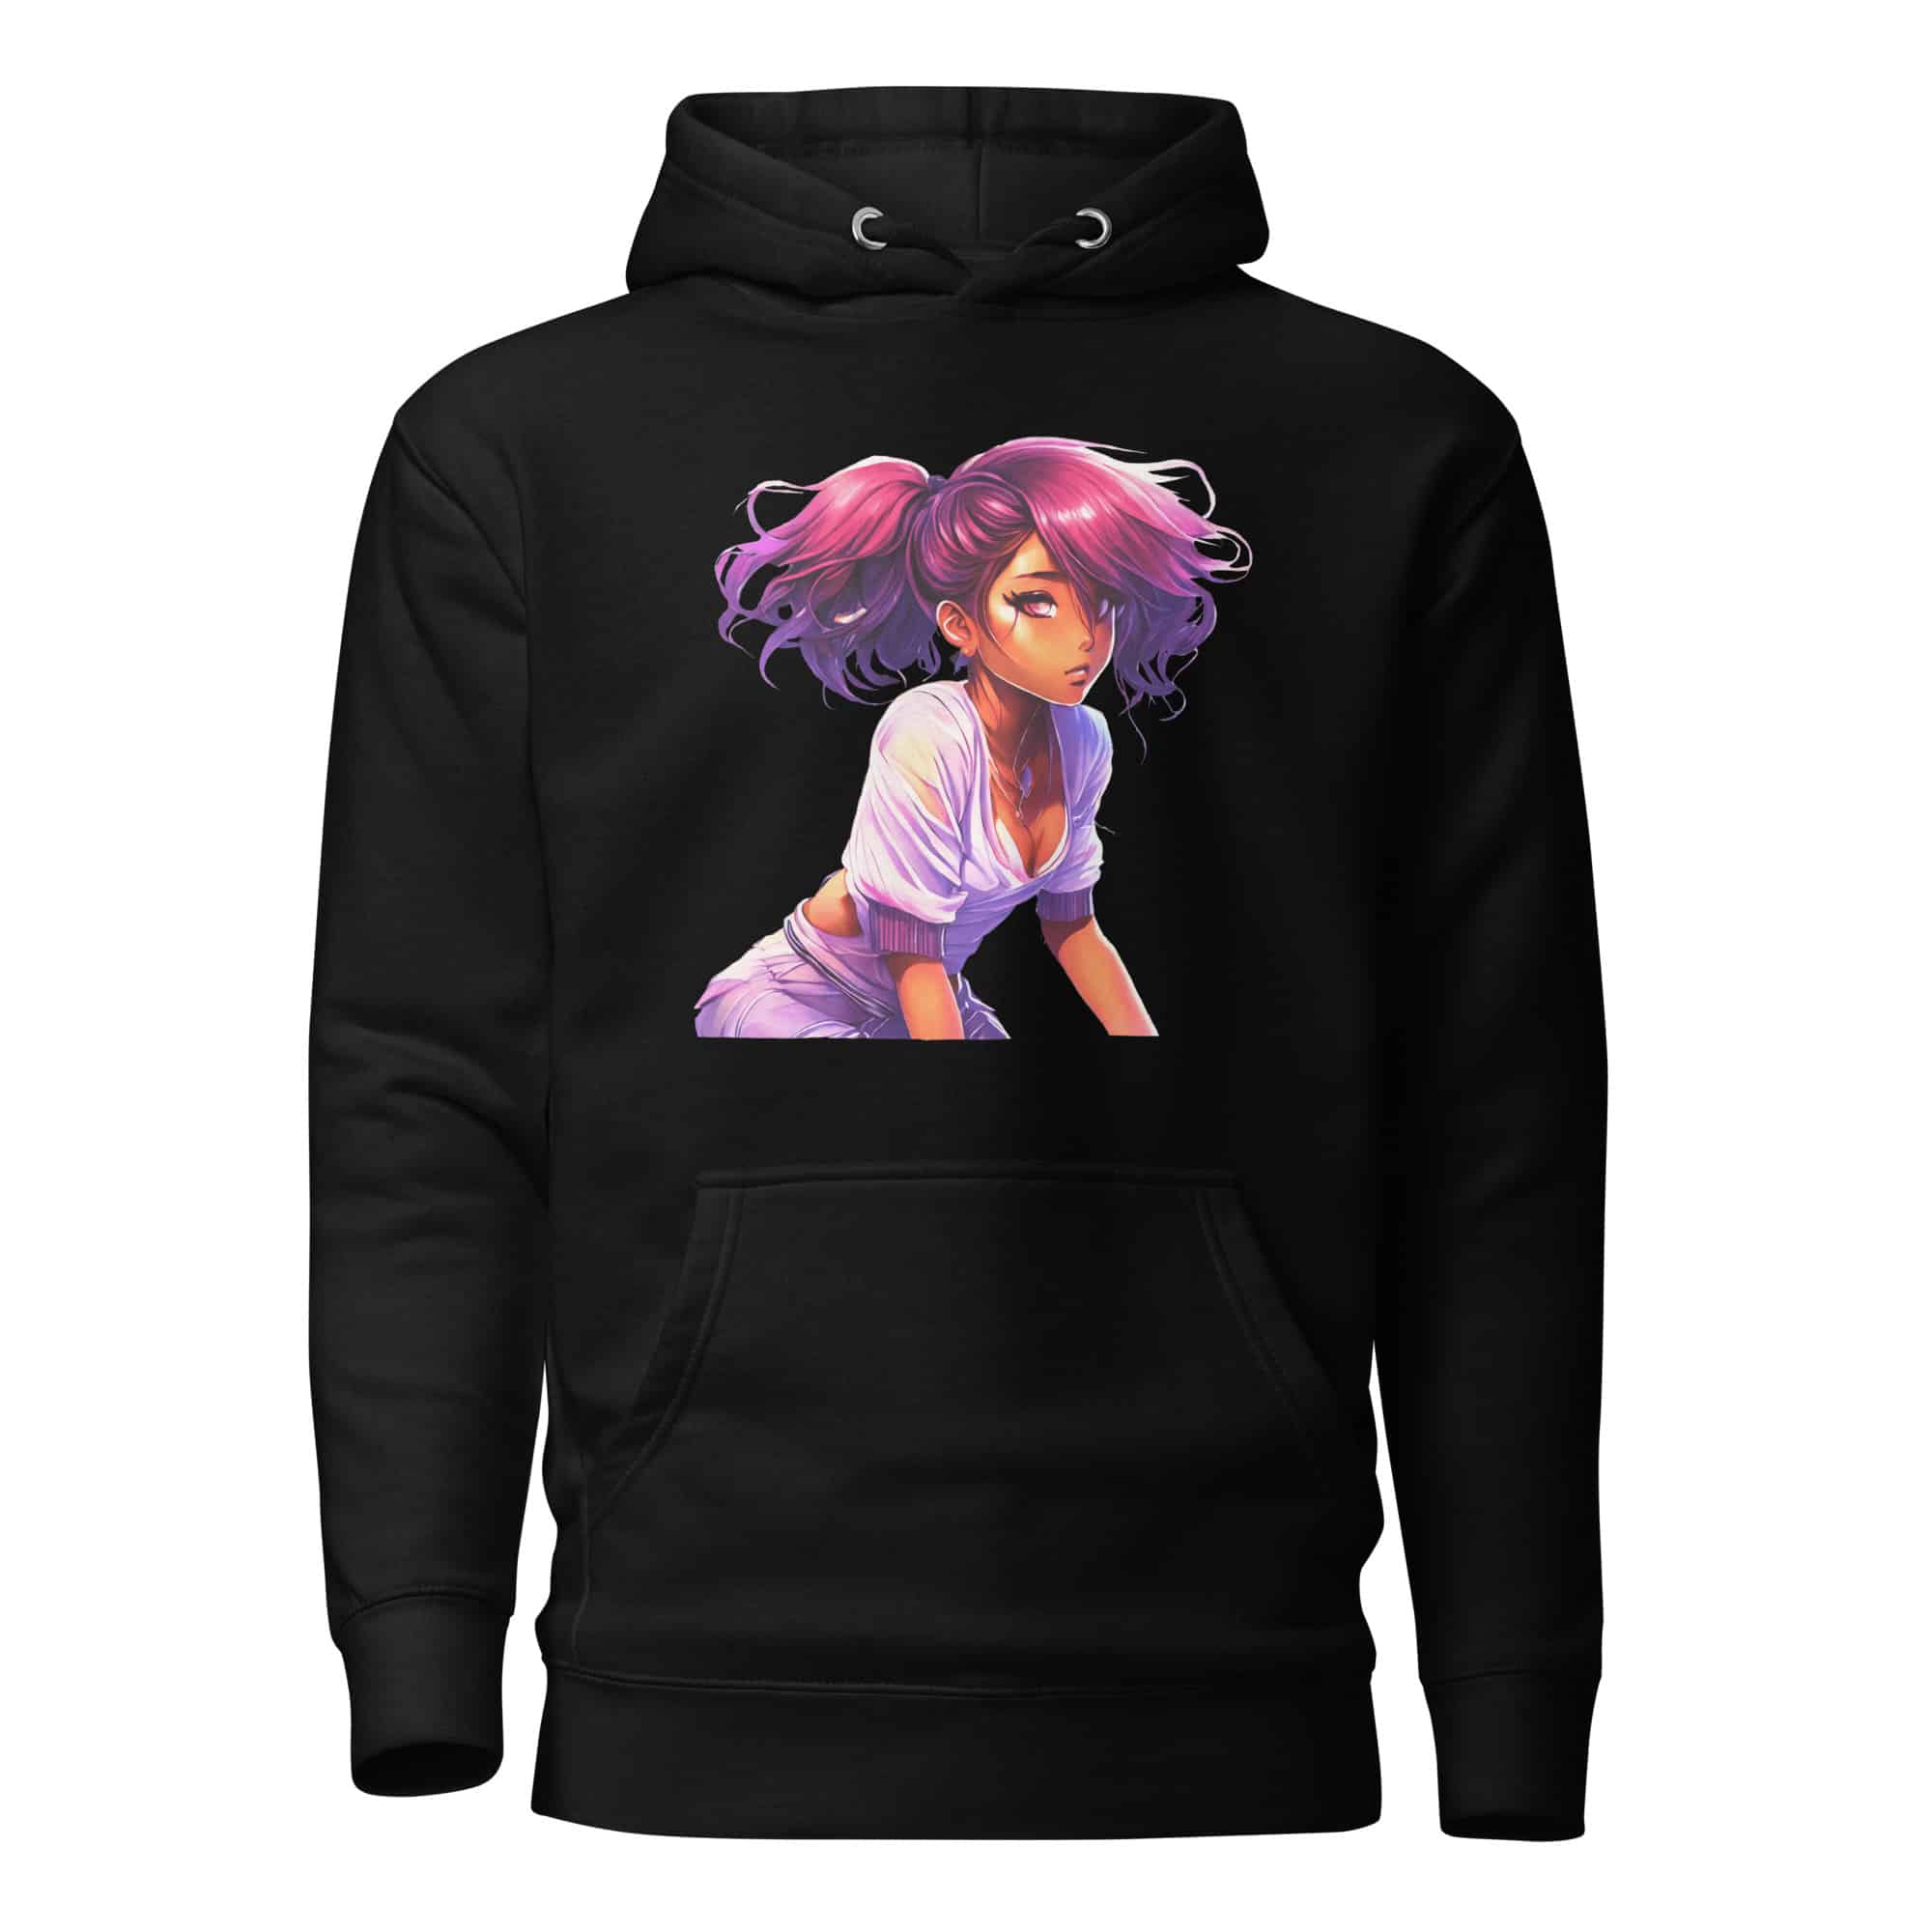 Anime Girl Unisex Hoodie Video game store Gaming merchandise Gaming accessories shop Online gaming store Video game shop near me Gaming console store PC gaming store Gaming gear shop Retro gaming shop Board game shop Anime merchandise Anime store online Japanese anime shop Anime figurines Manga shop Anime DVDs Anime accessories Anime apparel Anime collectibles Anime gifts